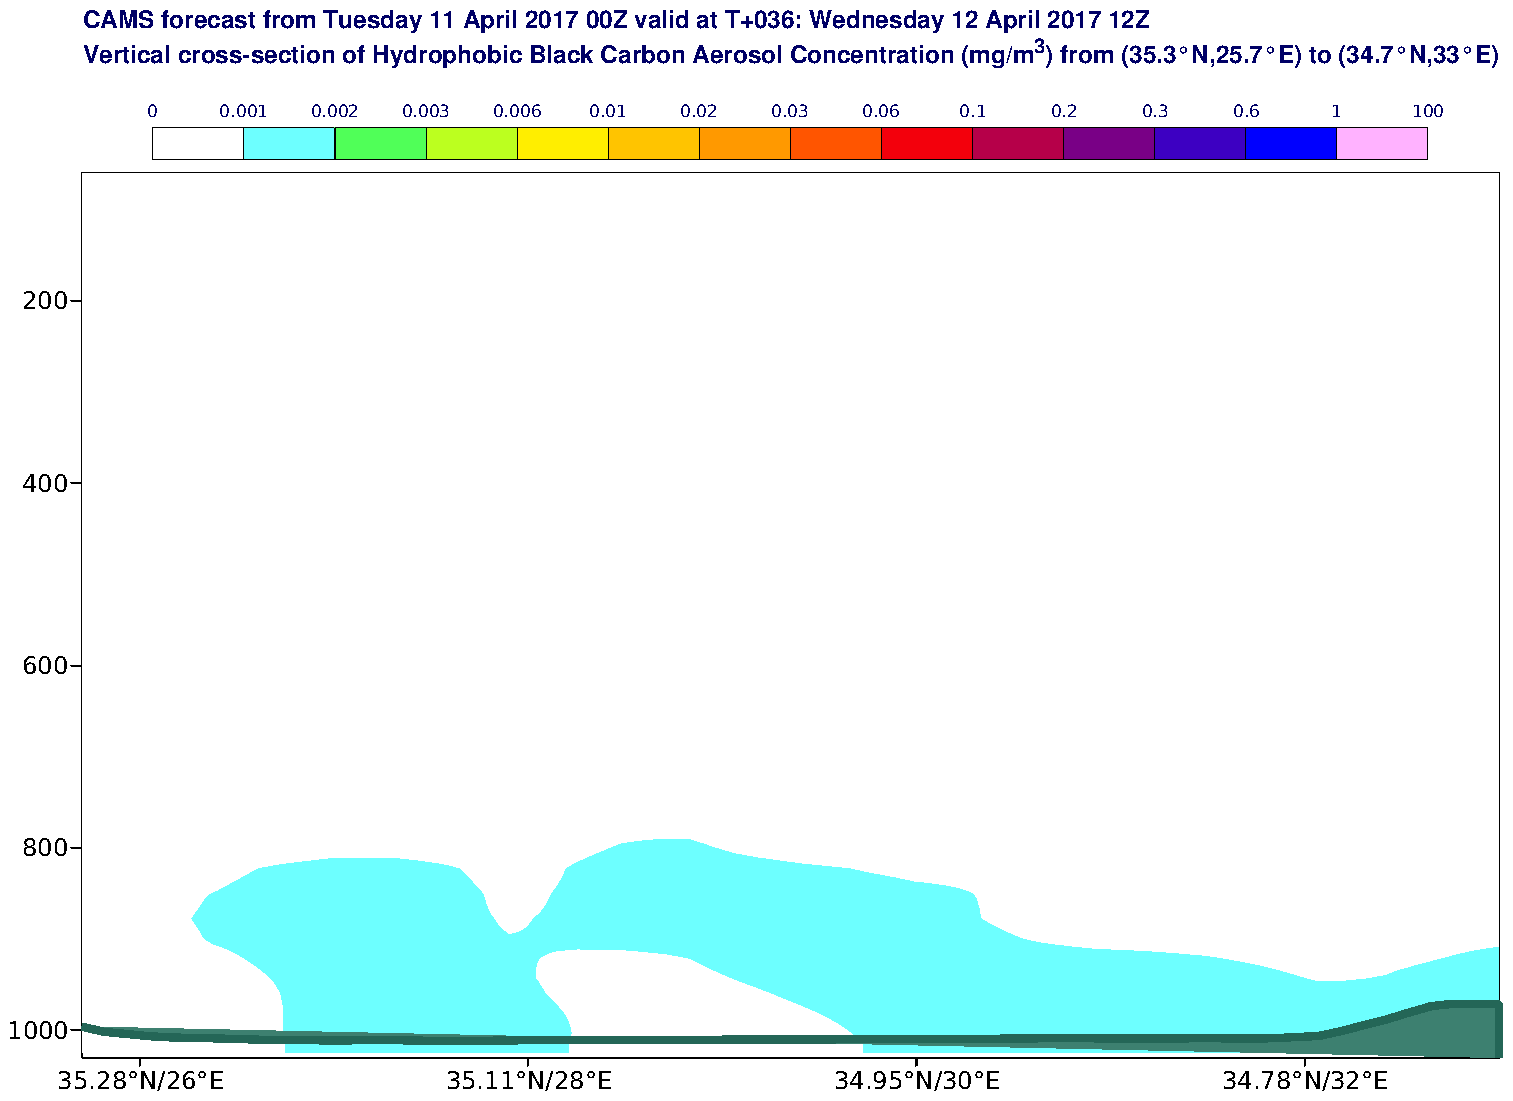 Vertical cross-section of Hydrophobic Black Carbon Aerosol Concentration (mg/m3) valid at T36 - 2017-04-12 12:00